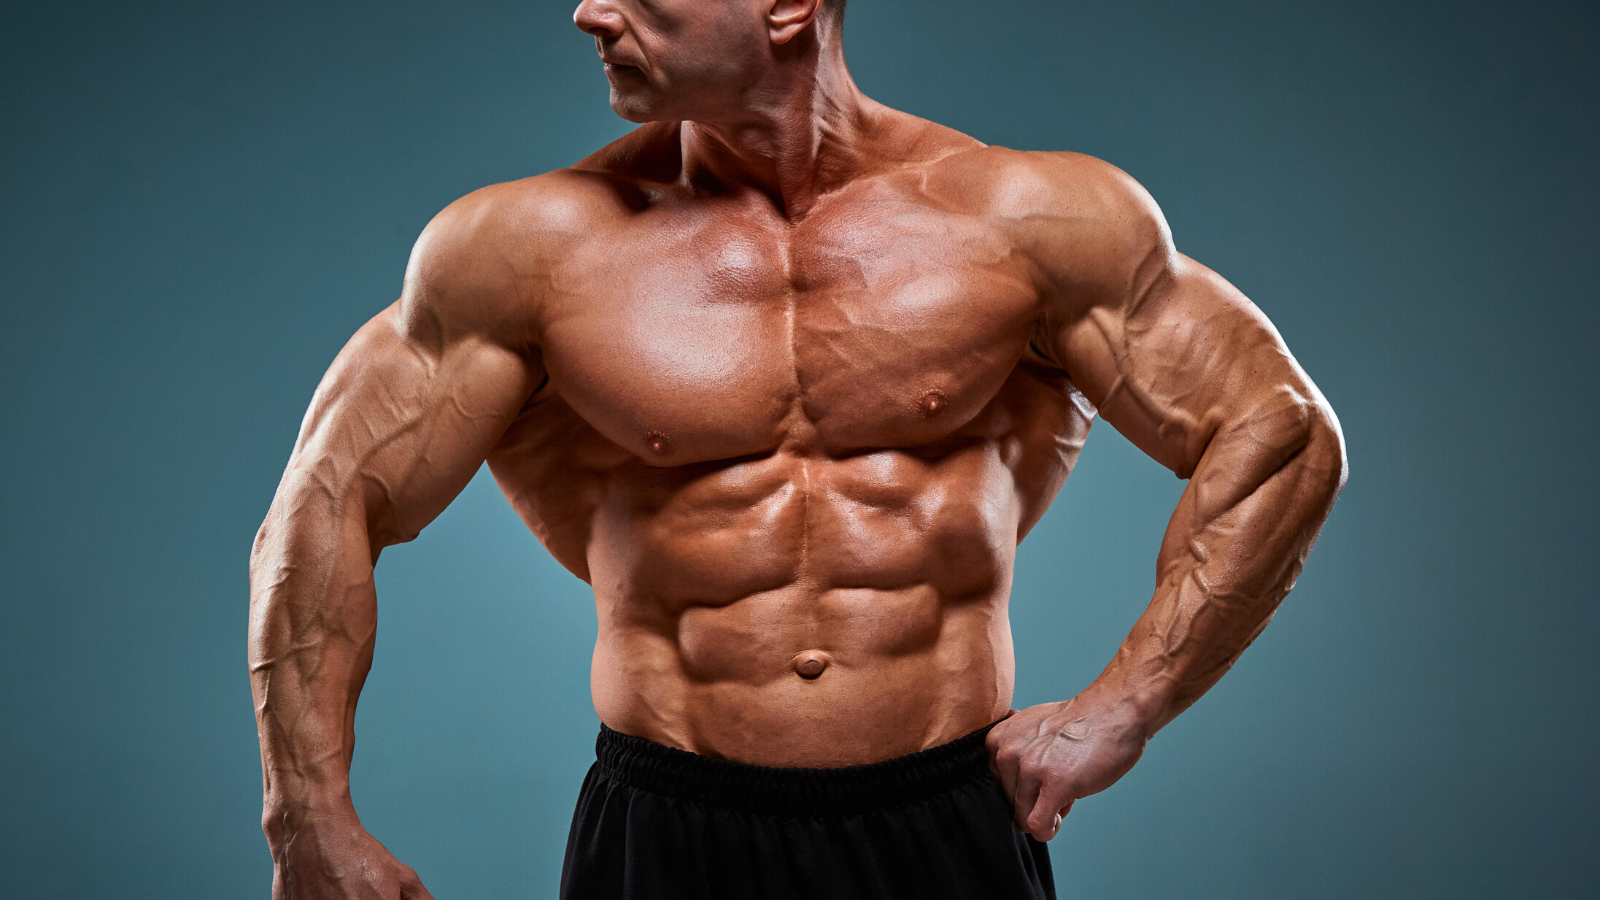 https://barbend.com/wp-content/uploads/2023/02/Barbend-Featured-Image-1600x900-A-muscular-bodybuilders-chest.png